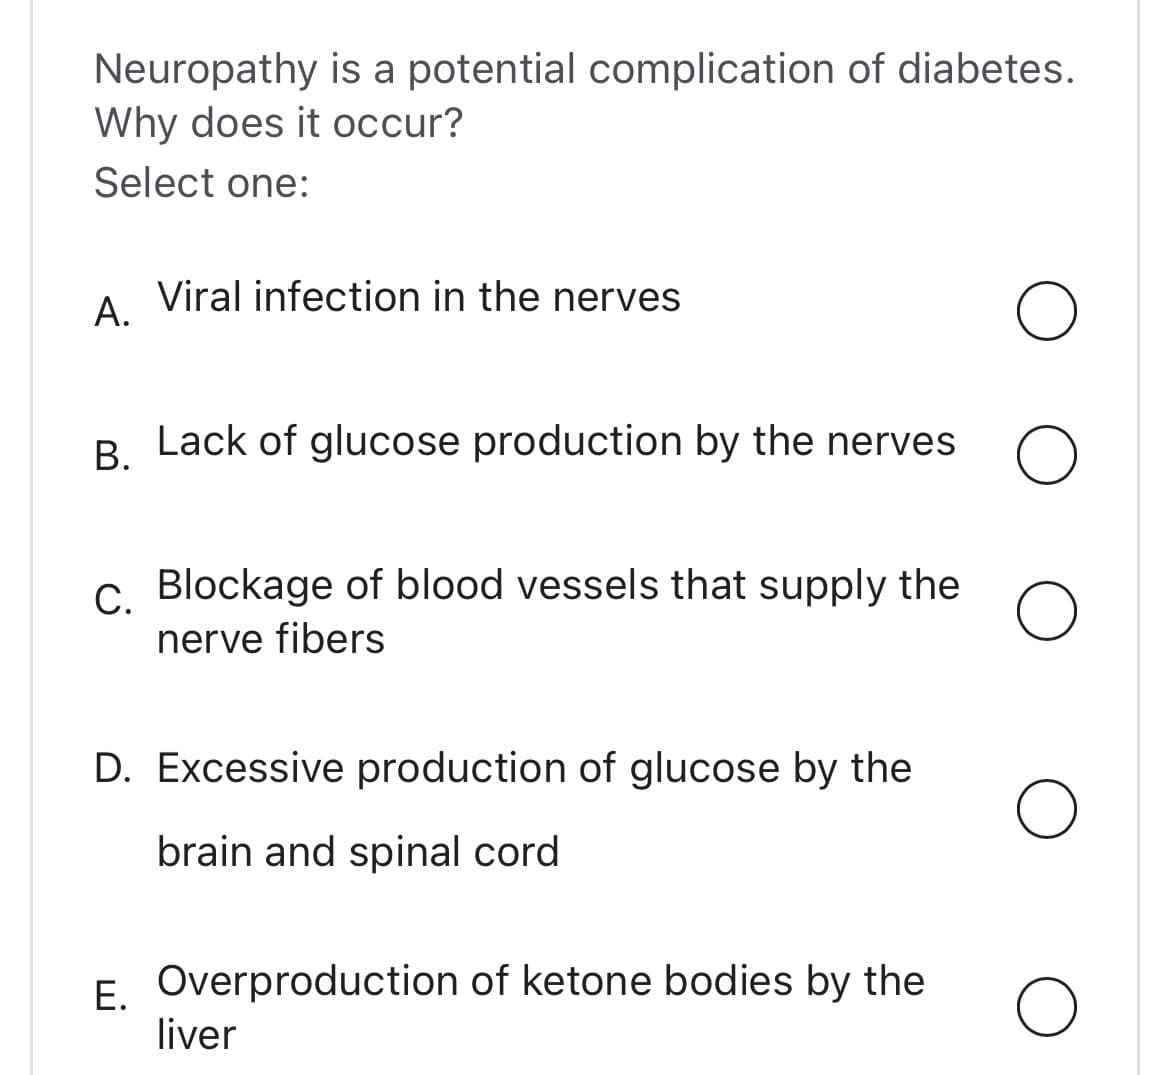 Neuropathy is a potential complication of diabetes.
Why does it occur?
Select one:
A.
Viral infection in the nerves
B. Lack of glucose production by the nerves o
C. Blockage of blood vessels that supply the
nerve fibers
O
D. Excessive production of glucose by the
brain and spinal cord
E. Overproduction of ketone bodies by the
liver
O
O